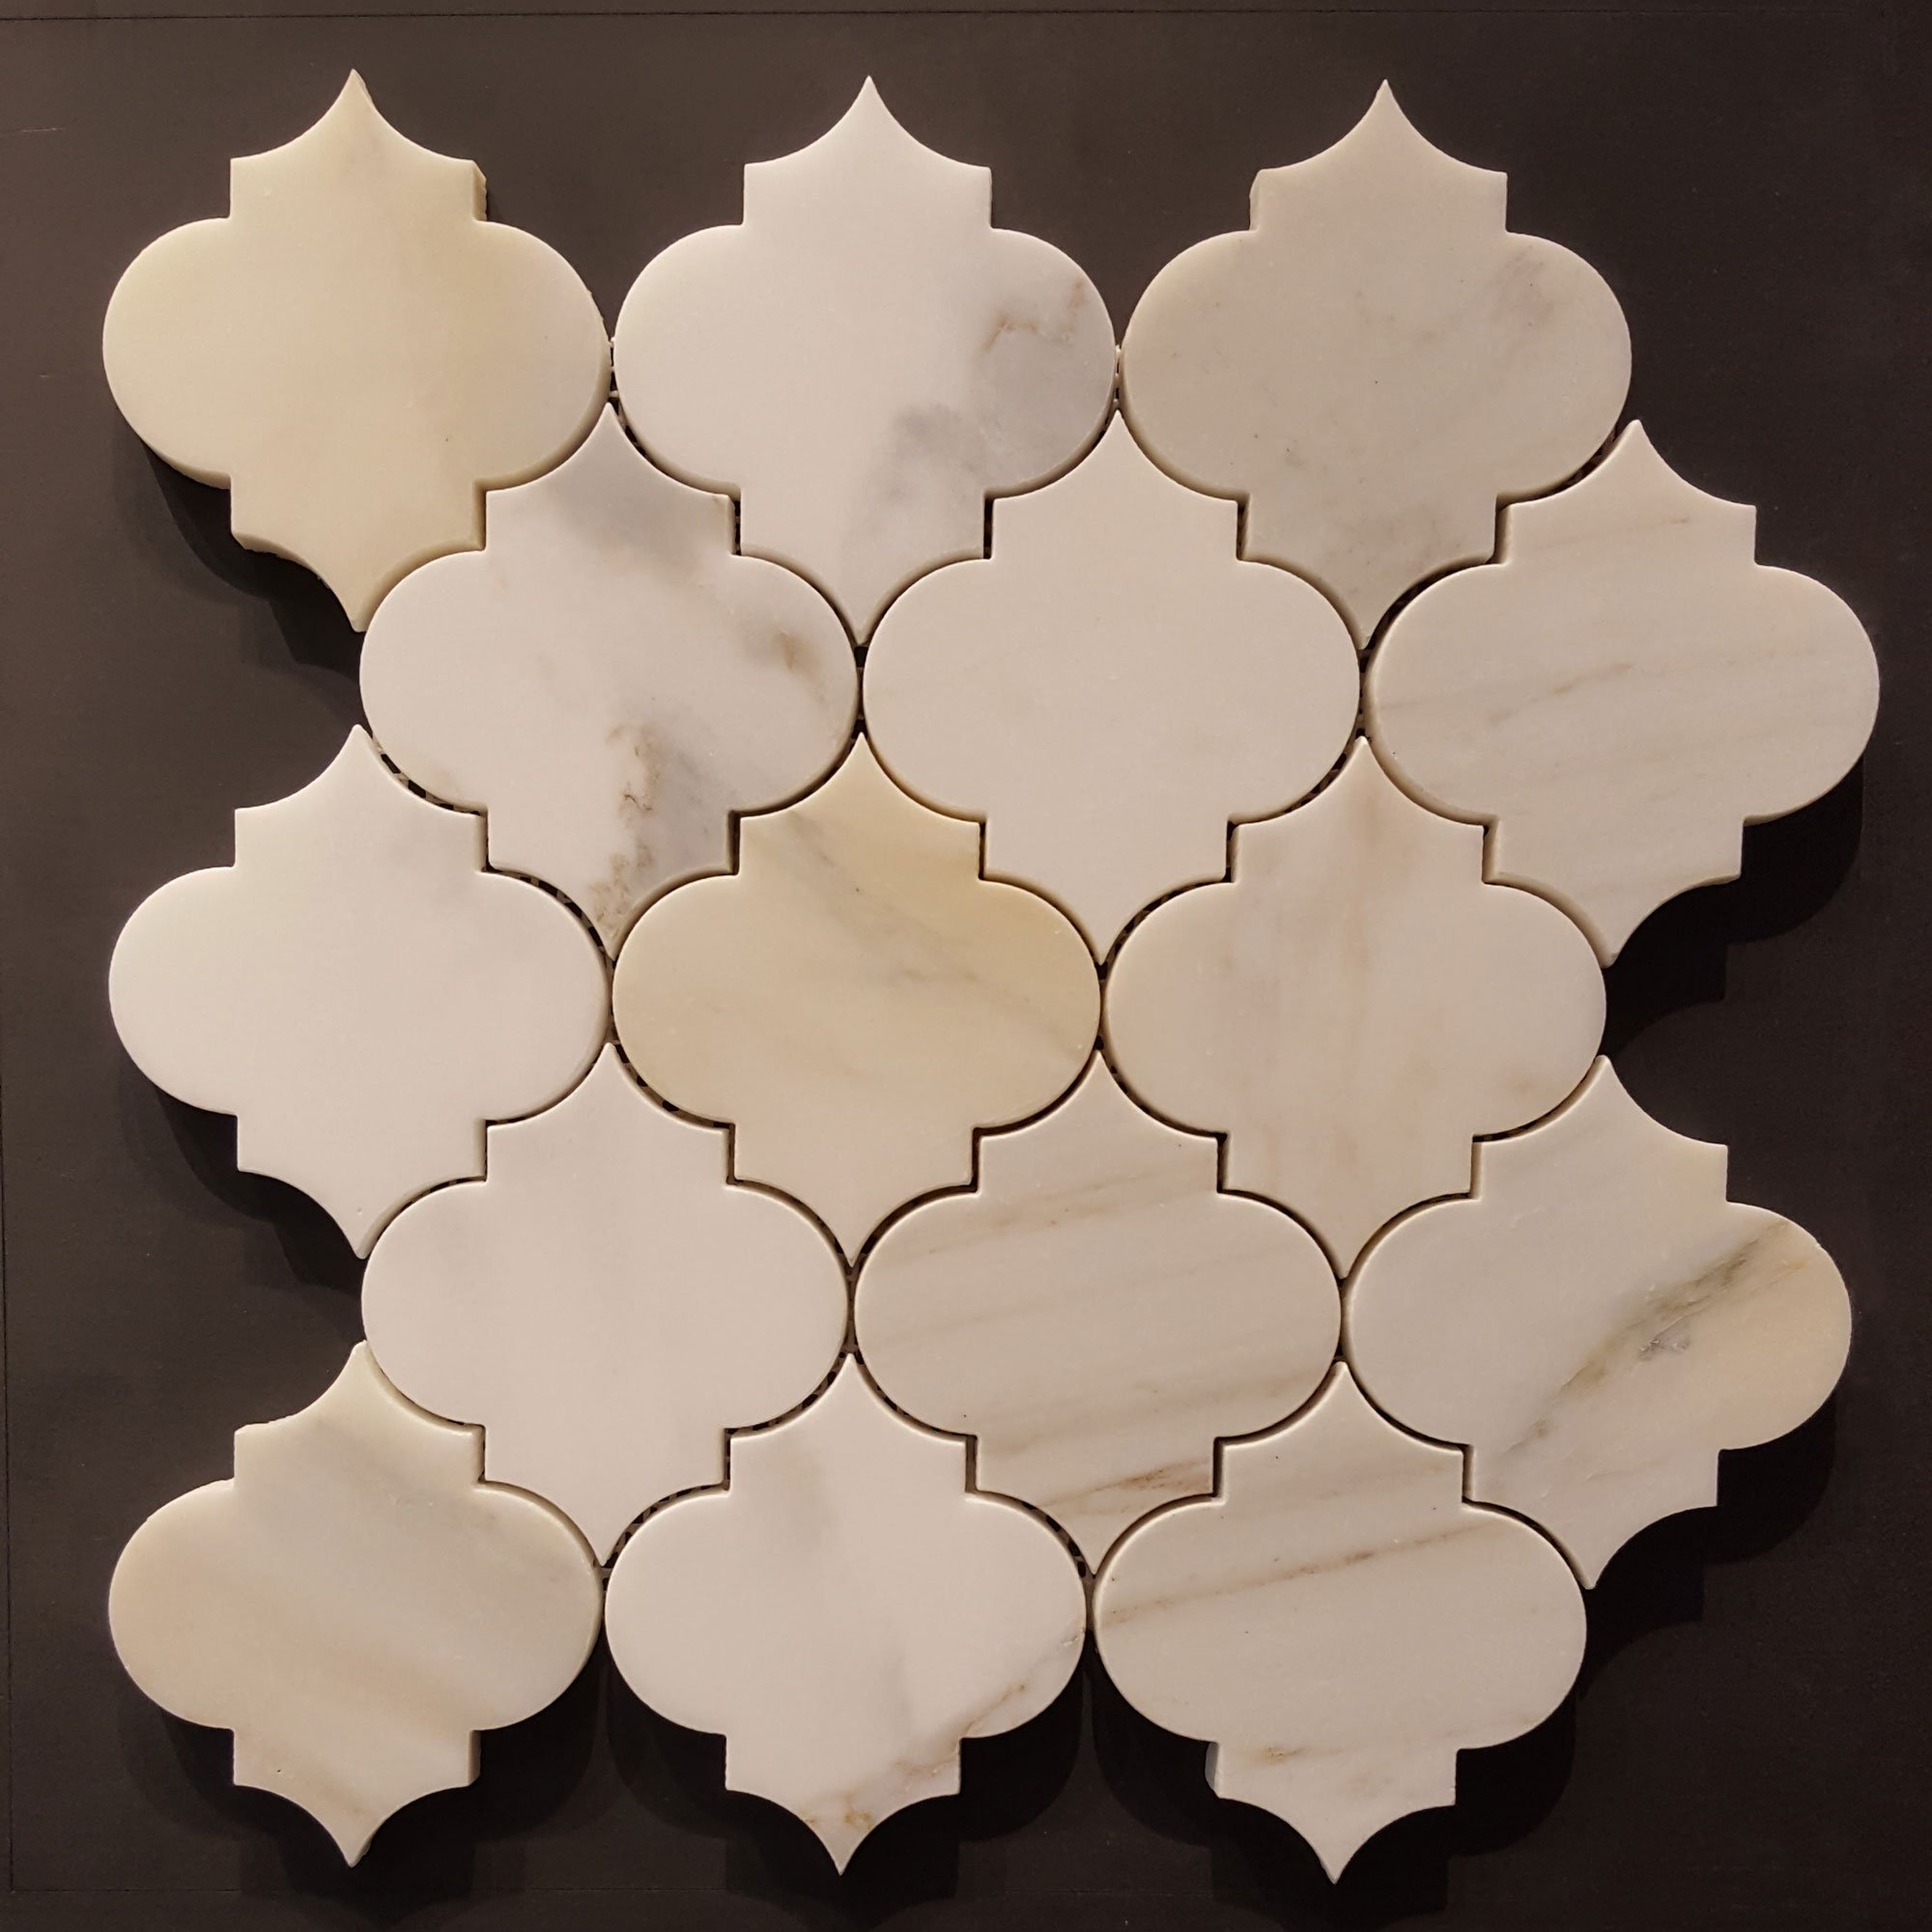 Richmond Tile Bath On Twitter This Calacatta Gold Verona Pattern From Our Richmond Tile Mosaic Collection Is A Beauty Patterns Alhambra Marble Tiles Calacatta Https Tco Tl6ns6595q